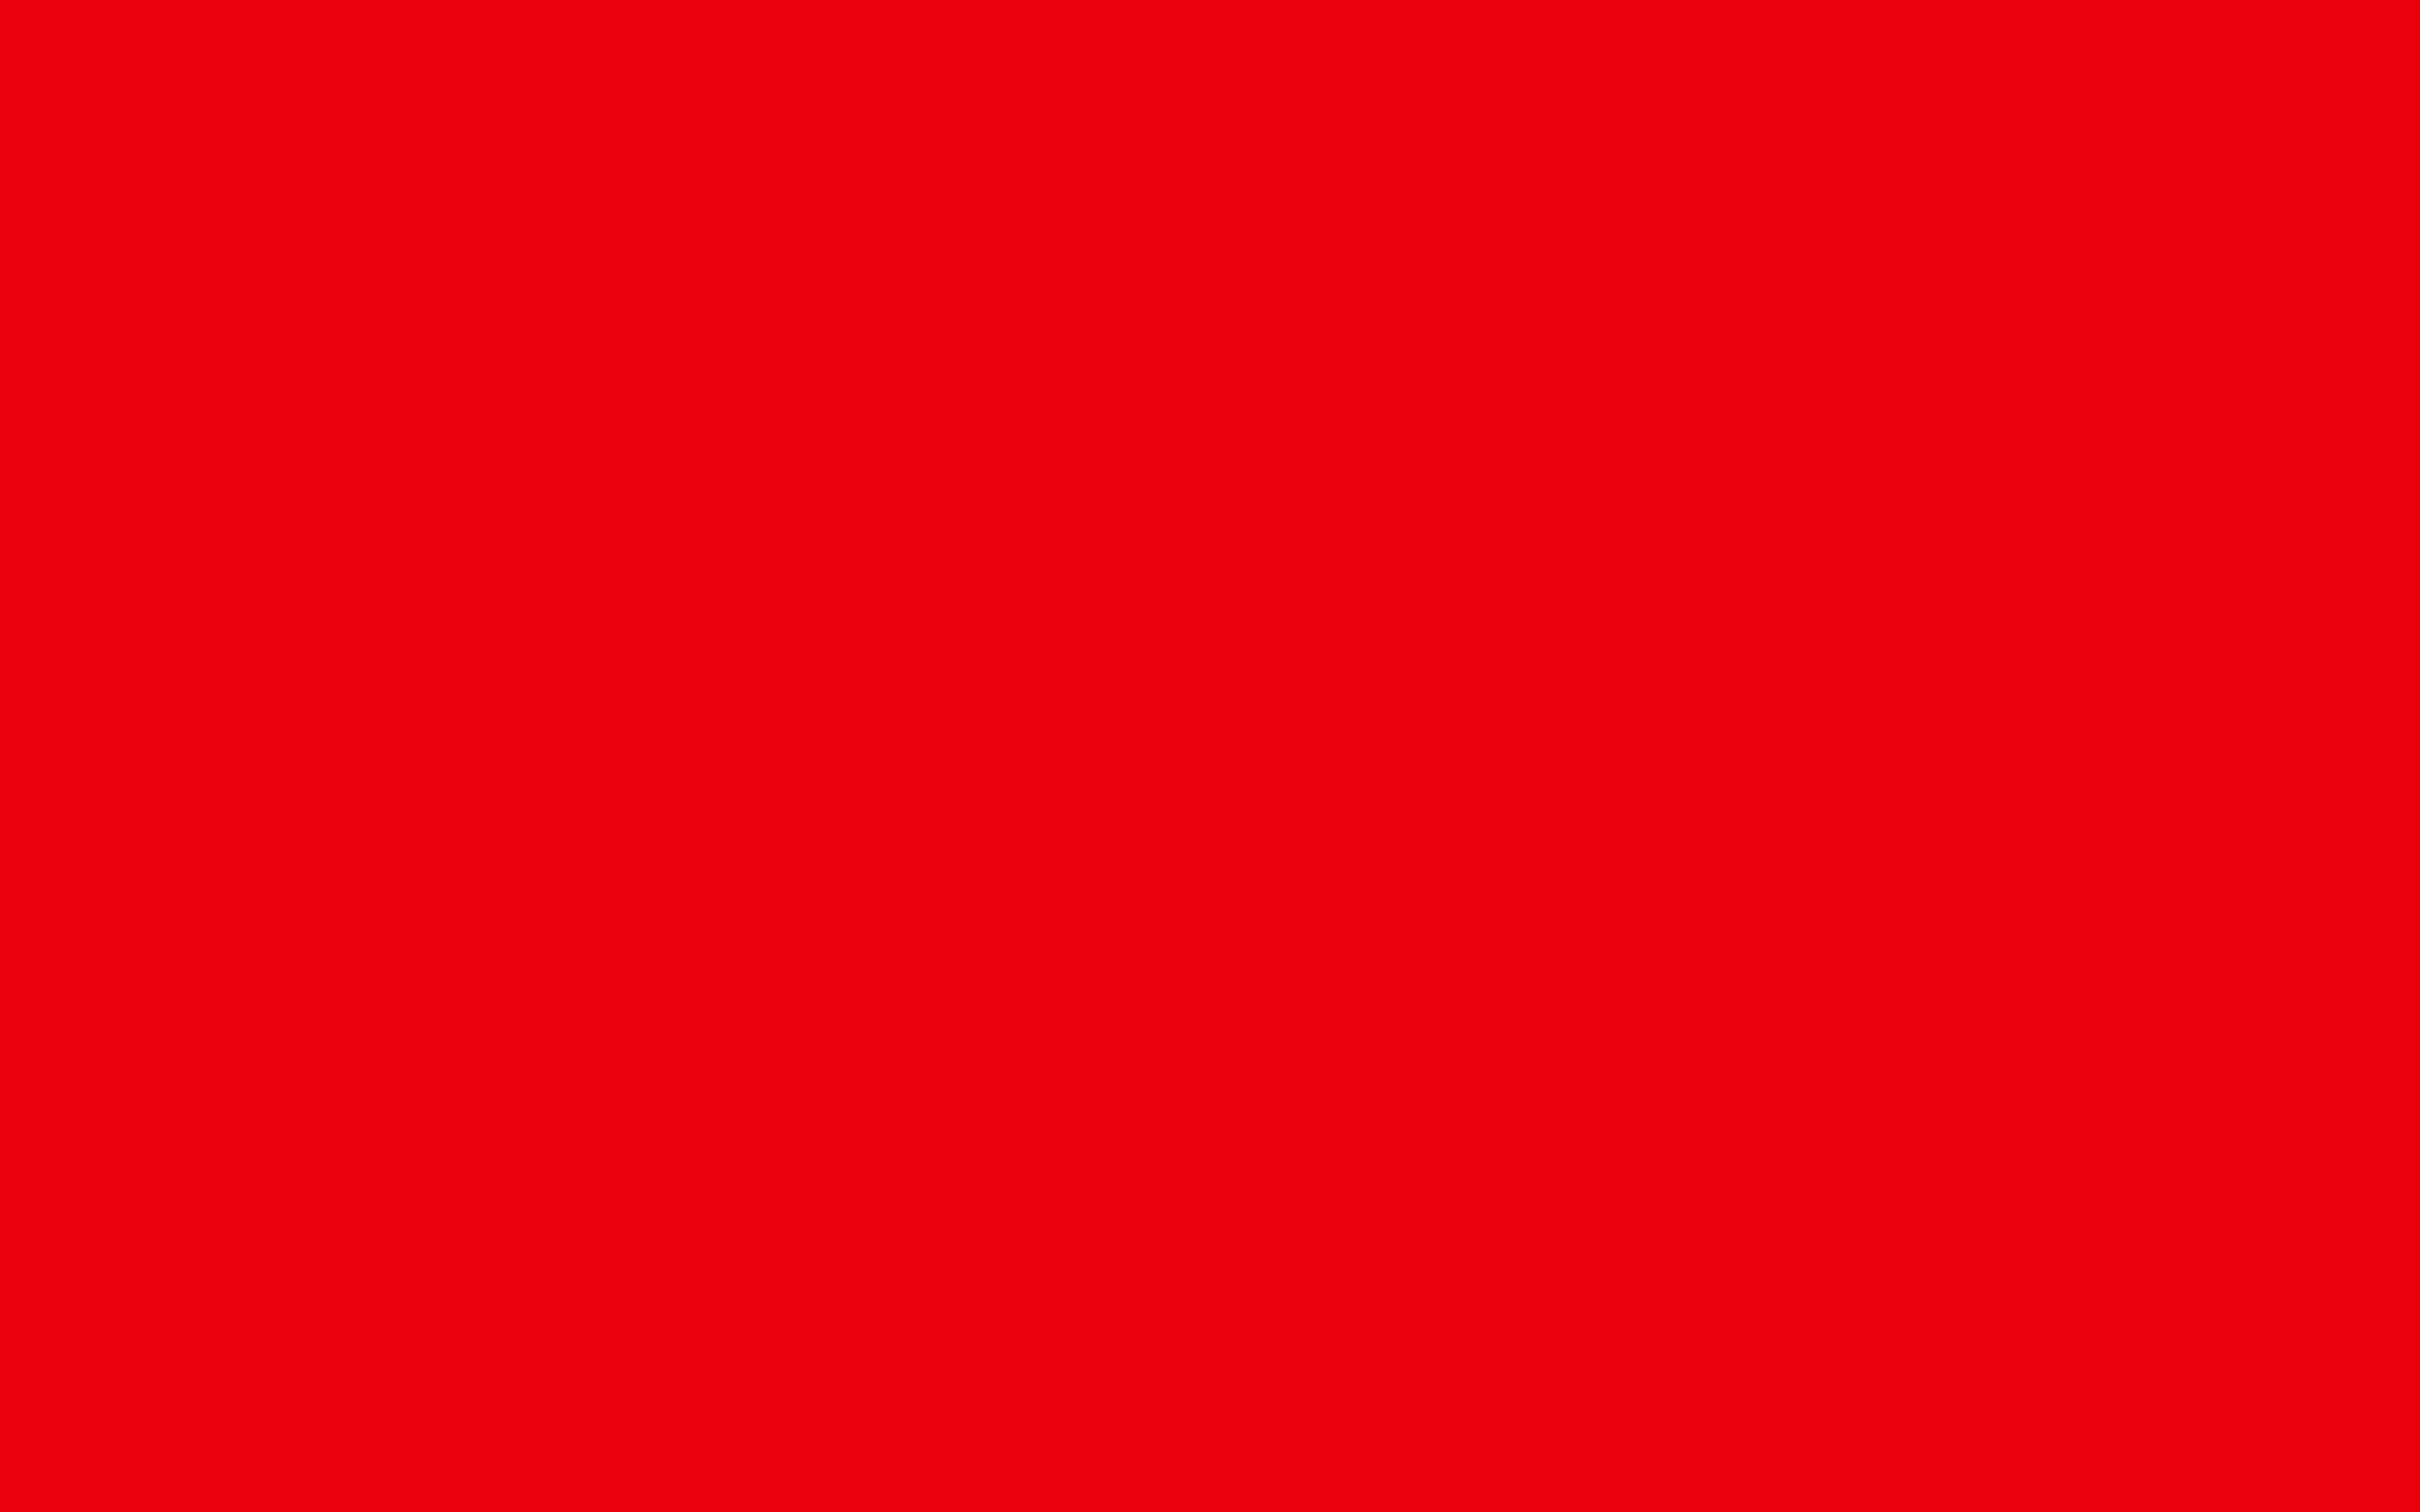 Solid Bright Red Background Image Gallery